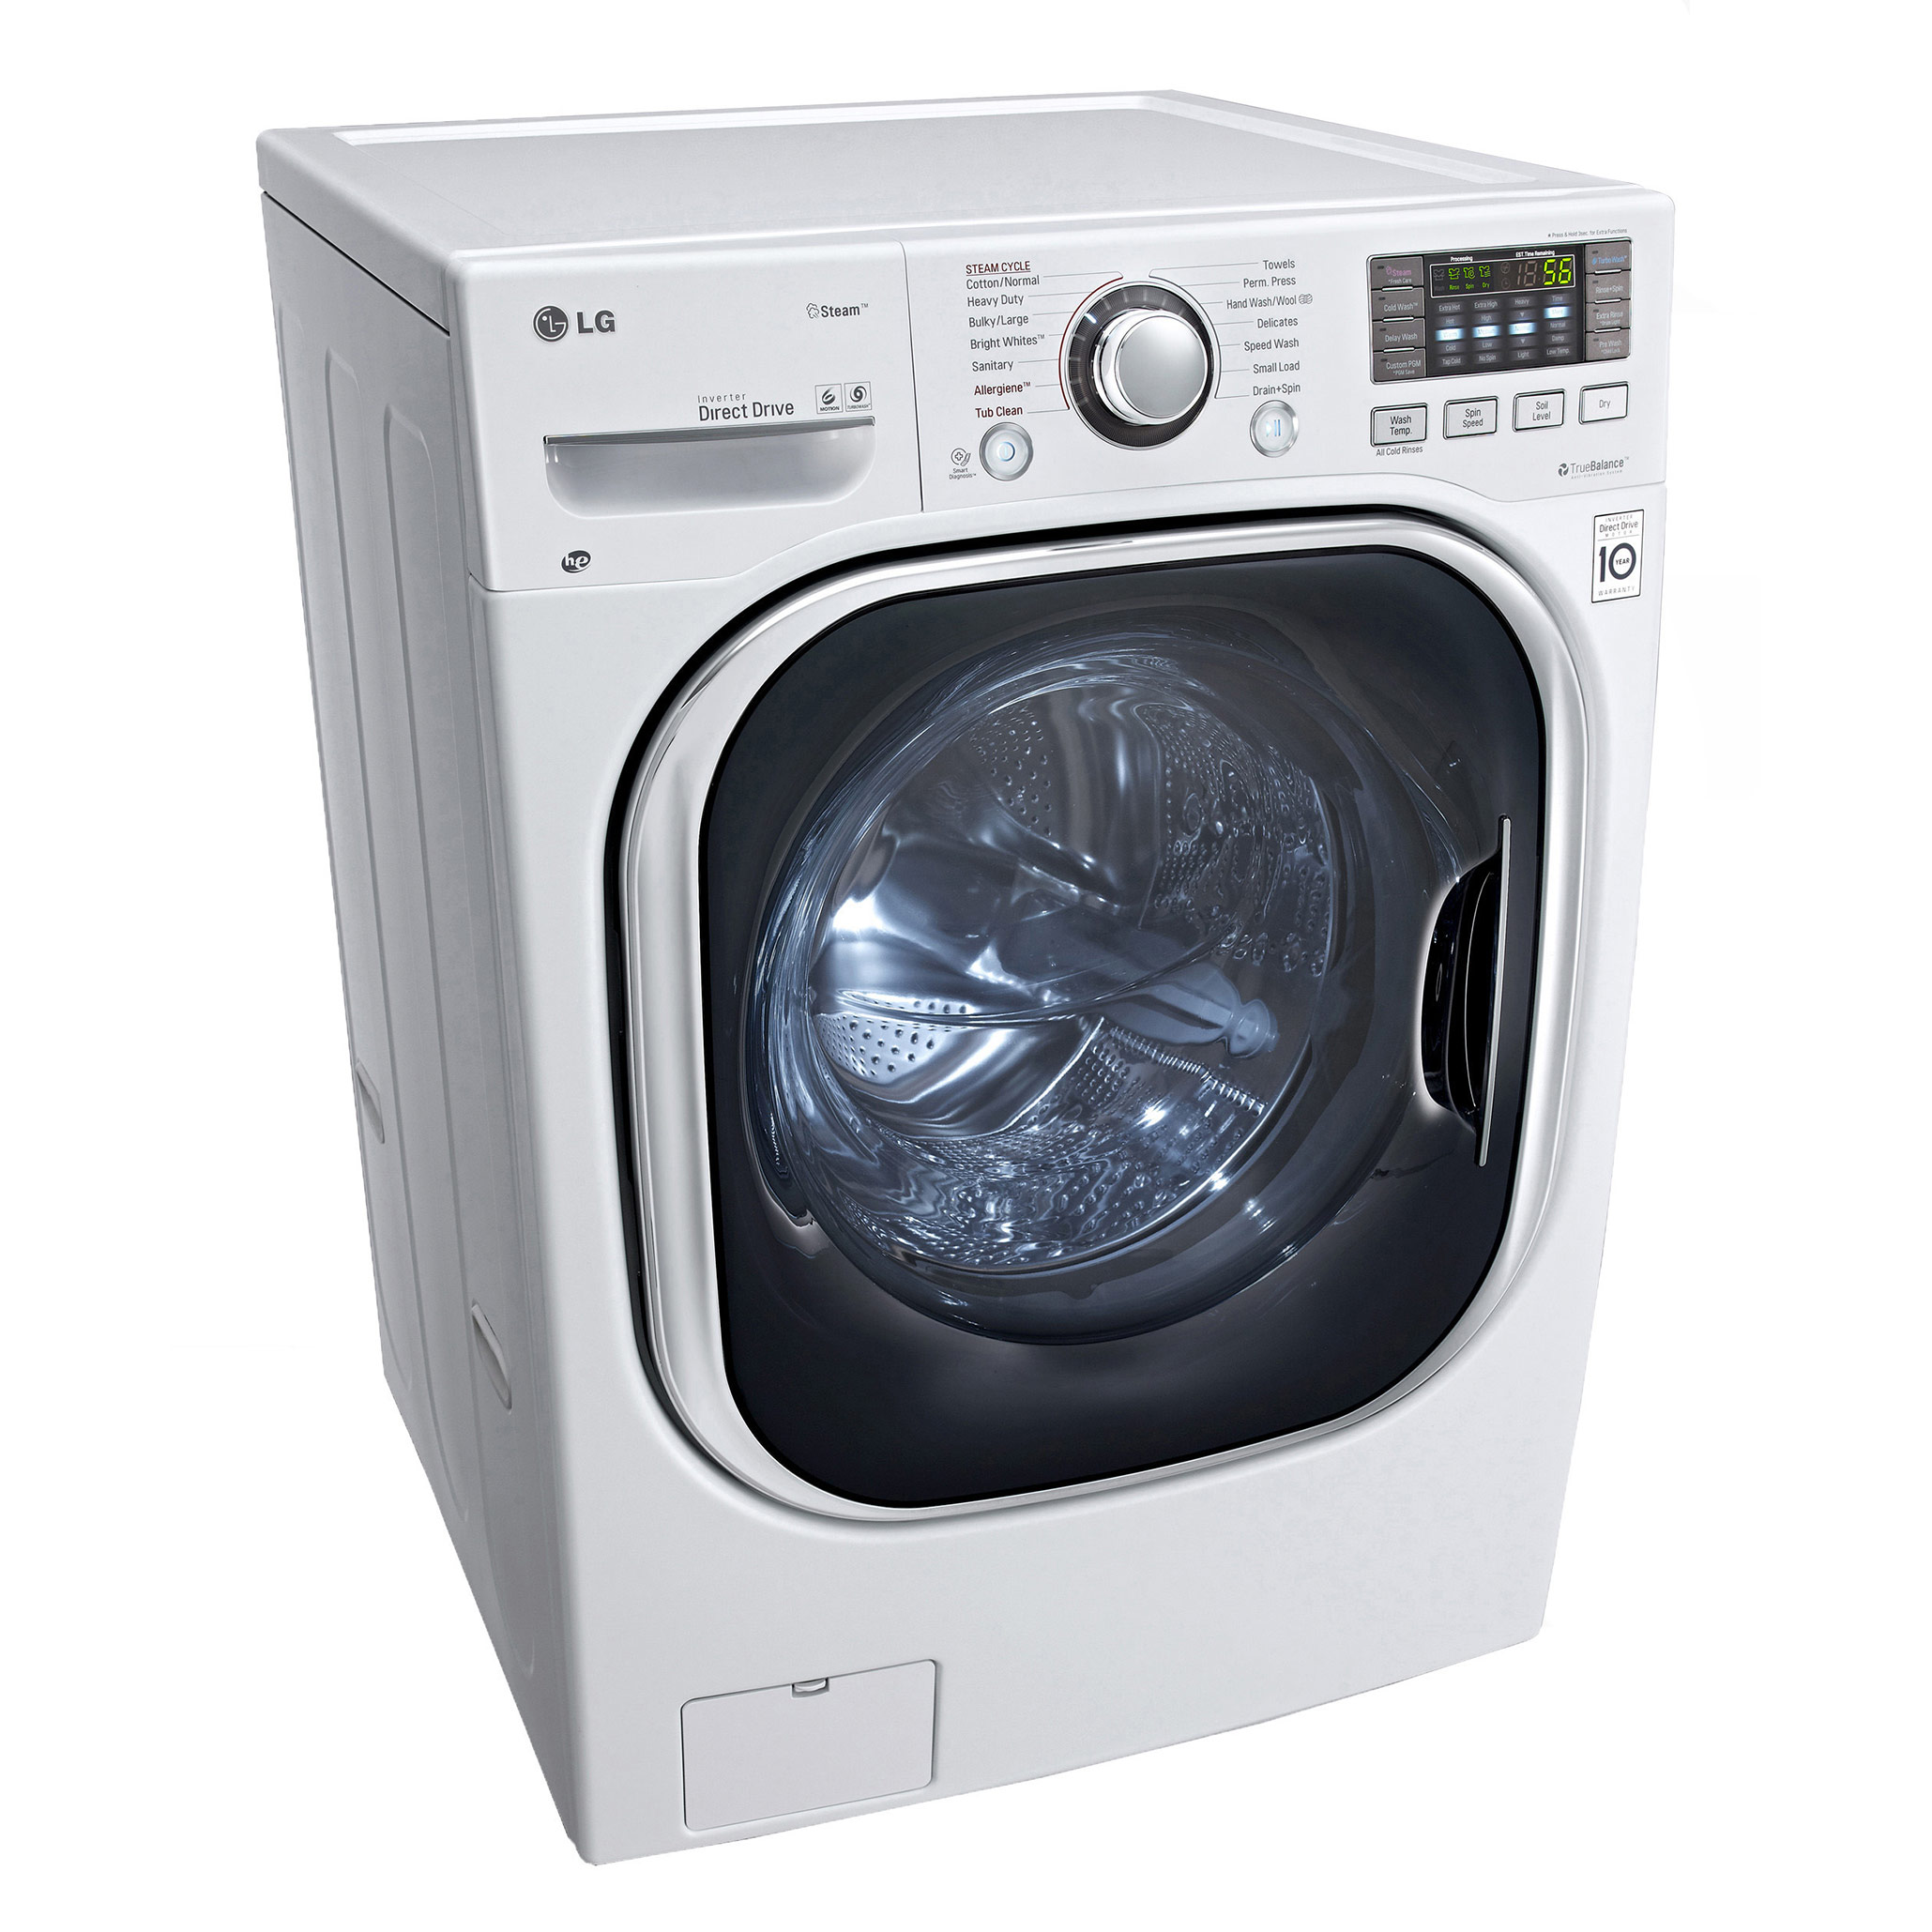 LG WM3997HWA | All in One Washer Dryer Combo | LGWasherDryer.com Portable All In One Washer Dryer Combo